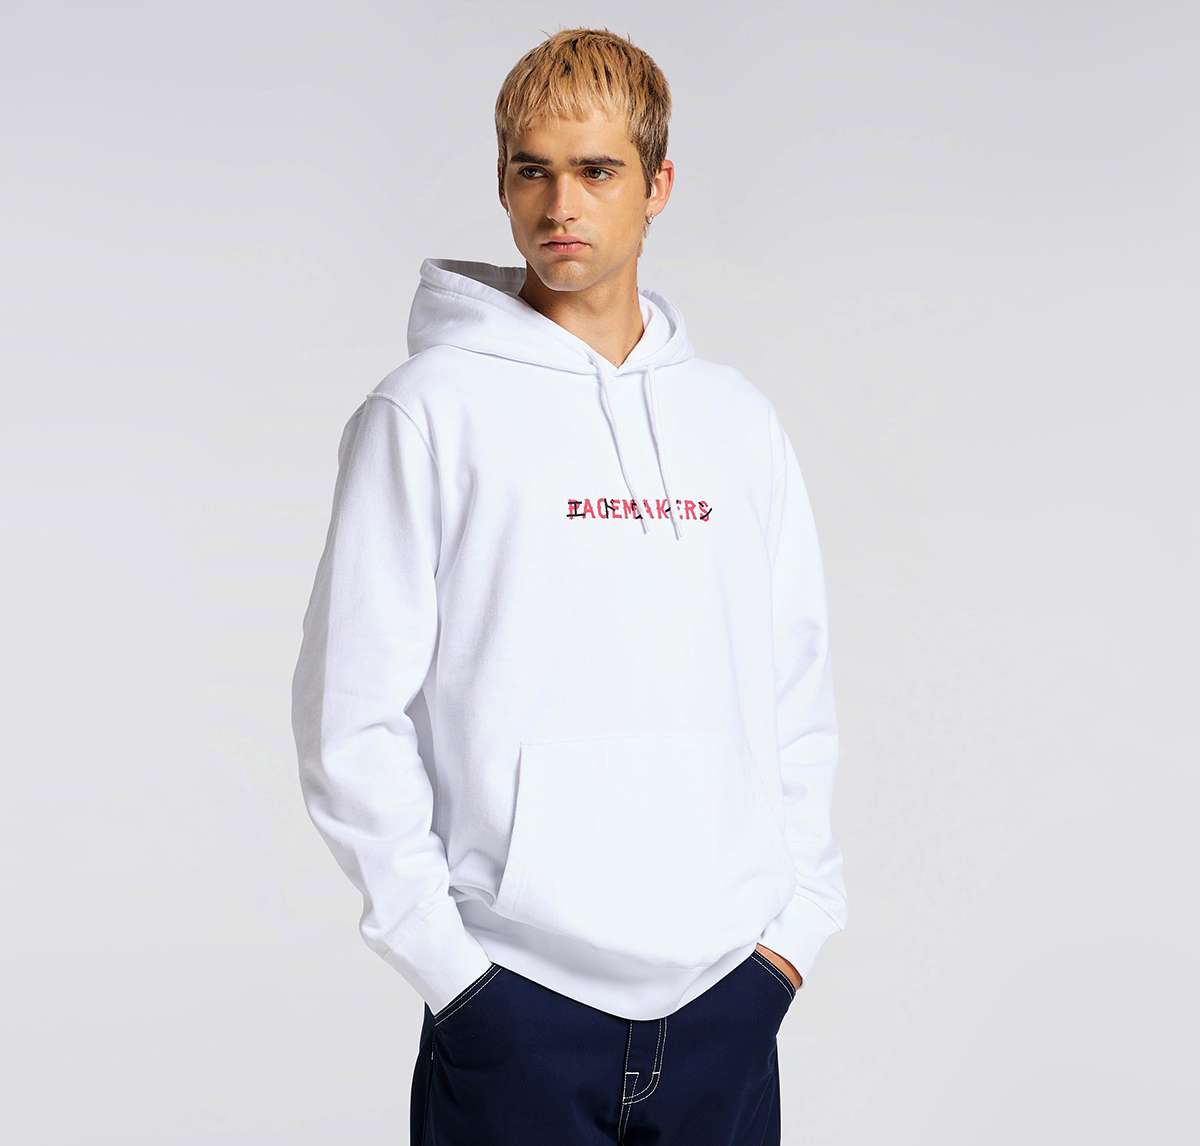 EDWIN Pacemaker - Eagle Hoodie - White front